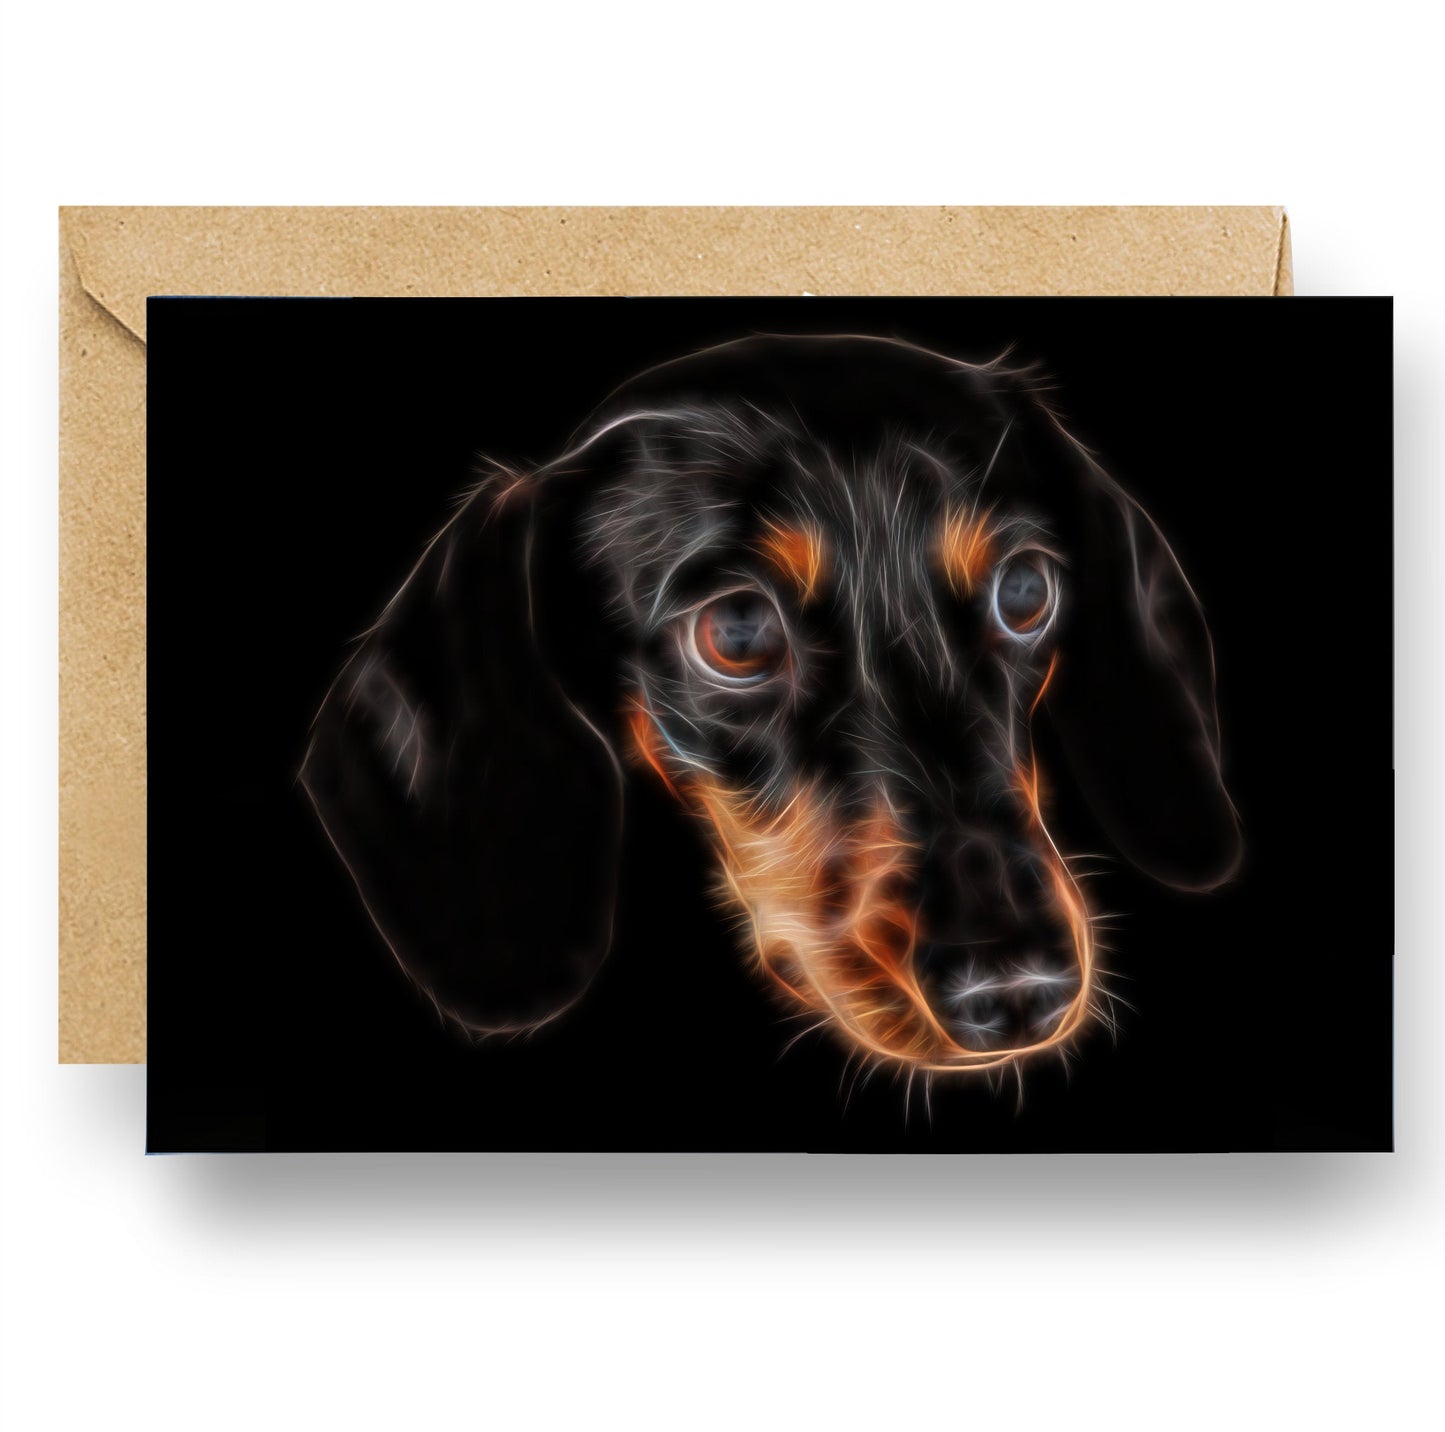 Black and Tan Dachshund Greeting Card Blank Inside for Birthdays or any other Occasion